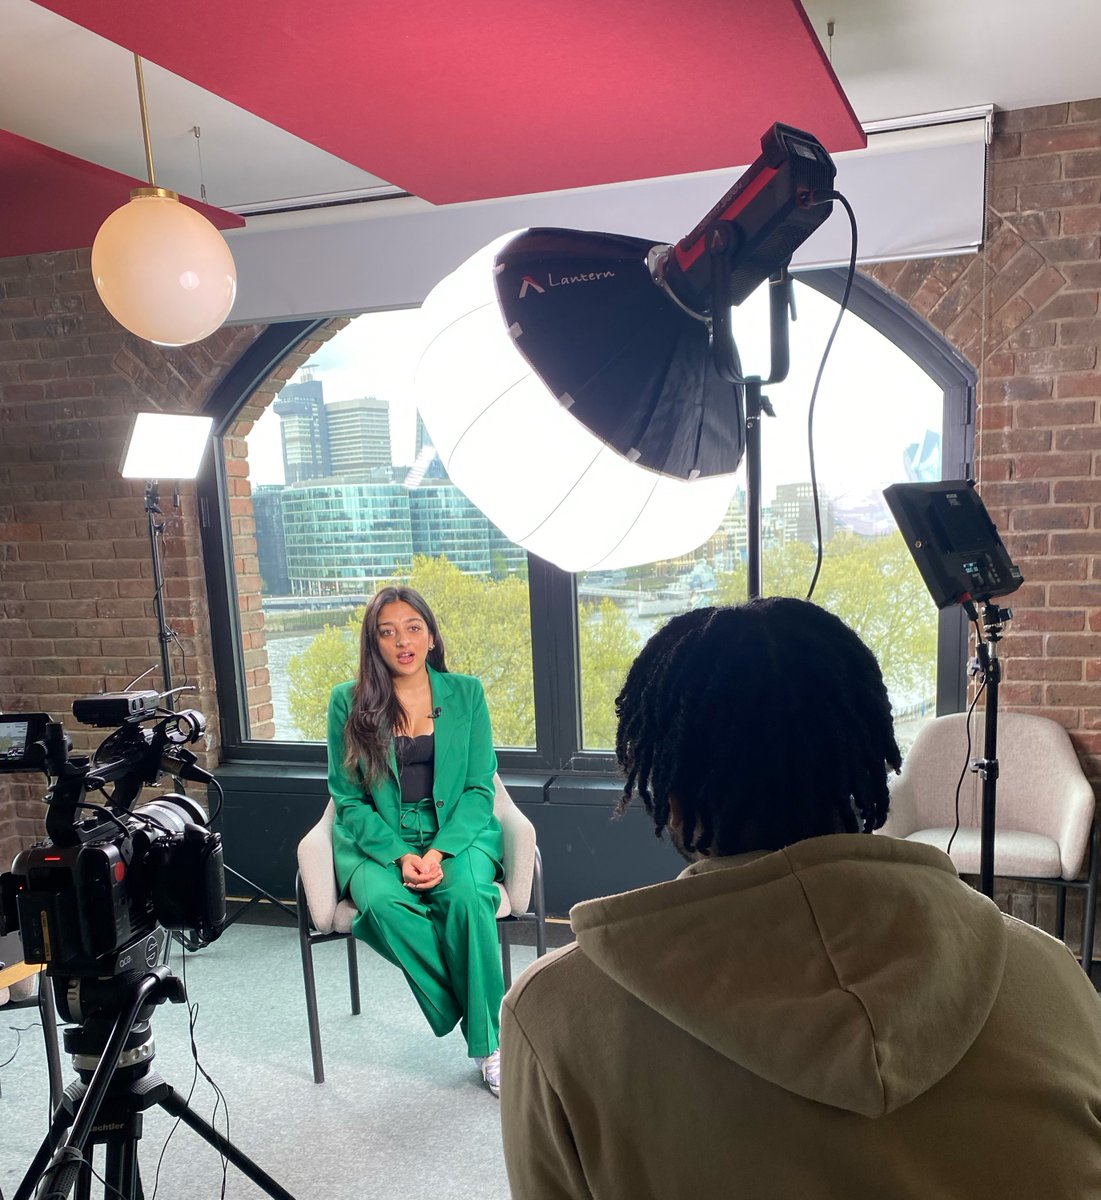 As part of an upcoming mini-documentary series featuring young high-achieving professionals, we enjoyed spending the day with the entrepreneur, author, and founder of LMF Network, @sonyabarlowuk Stay tuned to hear more from Sonya Barlow and other speakers from this new series.